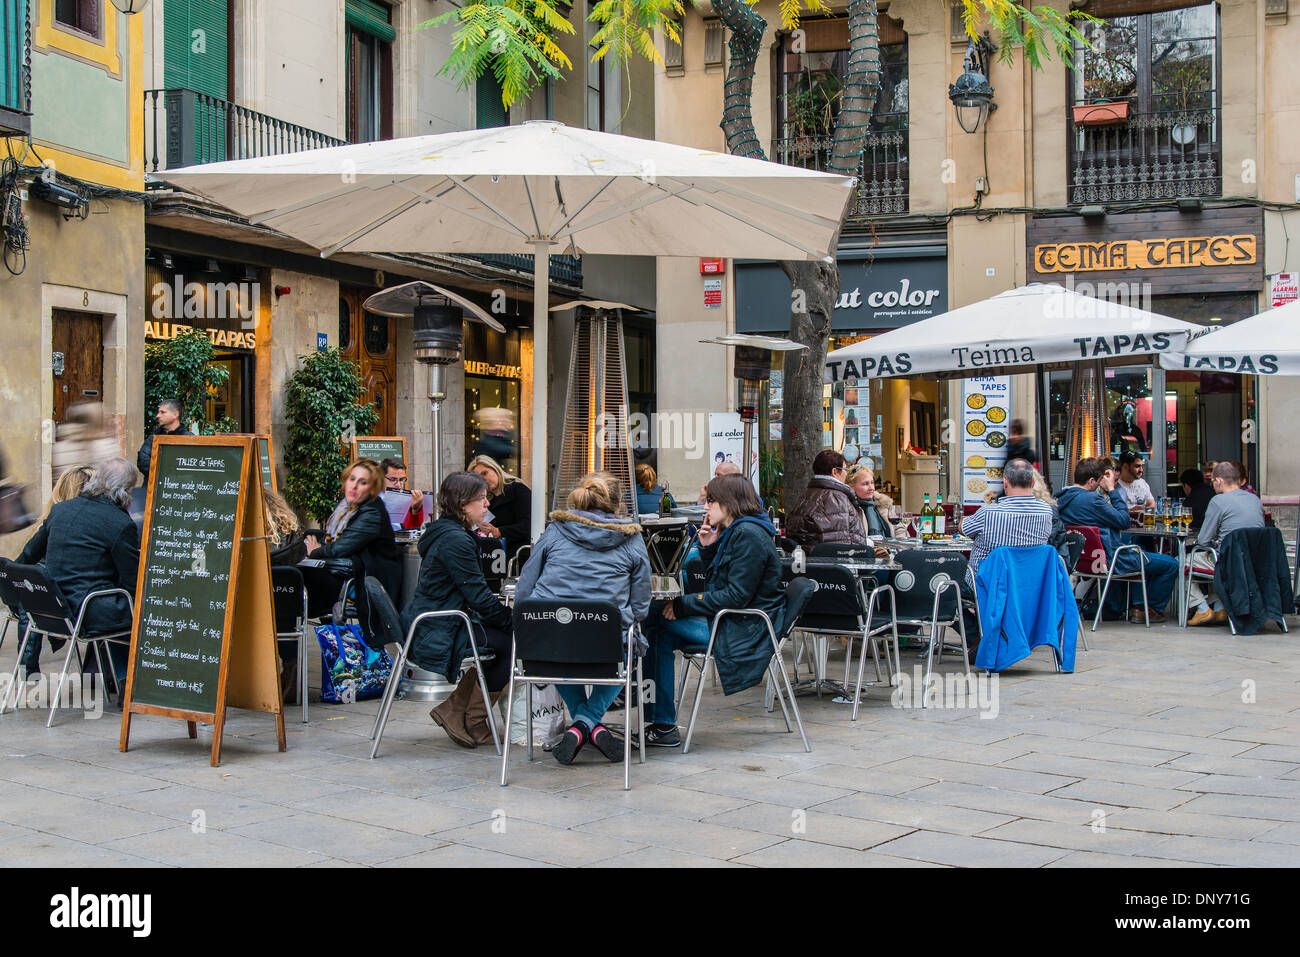 People seated in an outdoor cafe in Barrio Gotico district, Barcelona, Catalonia, Spain Stock Photo